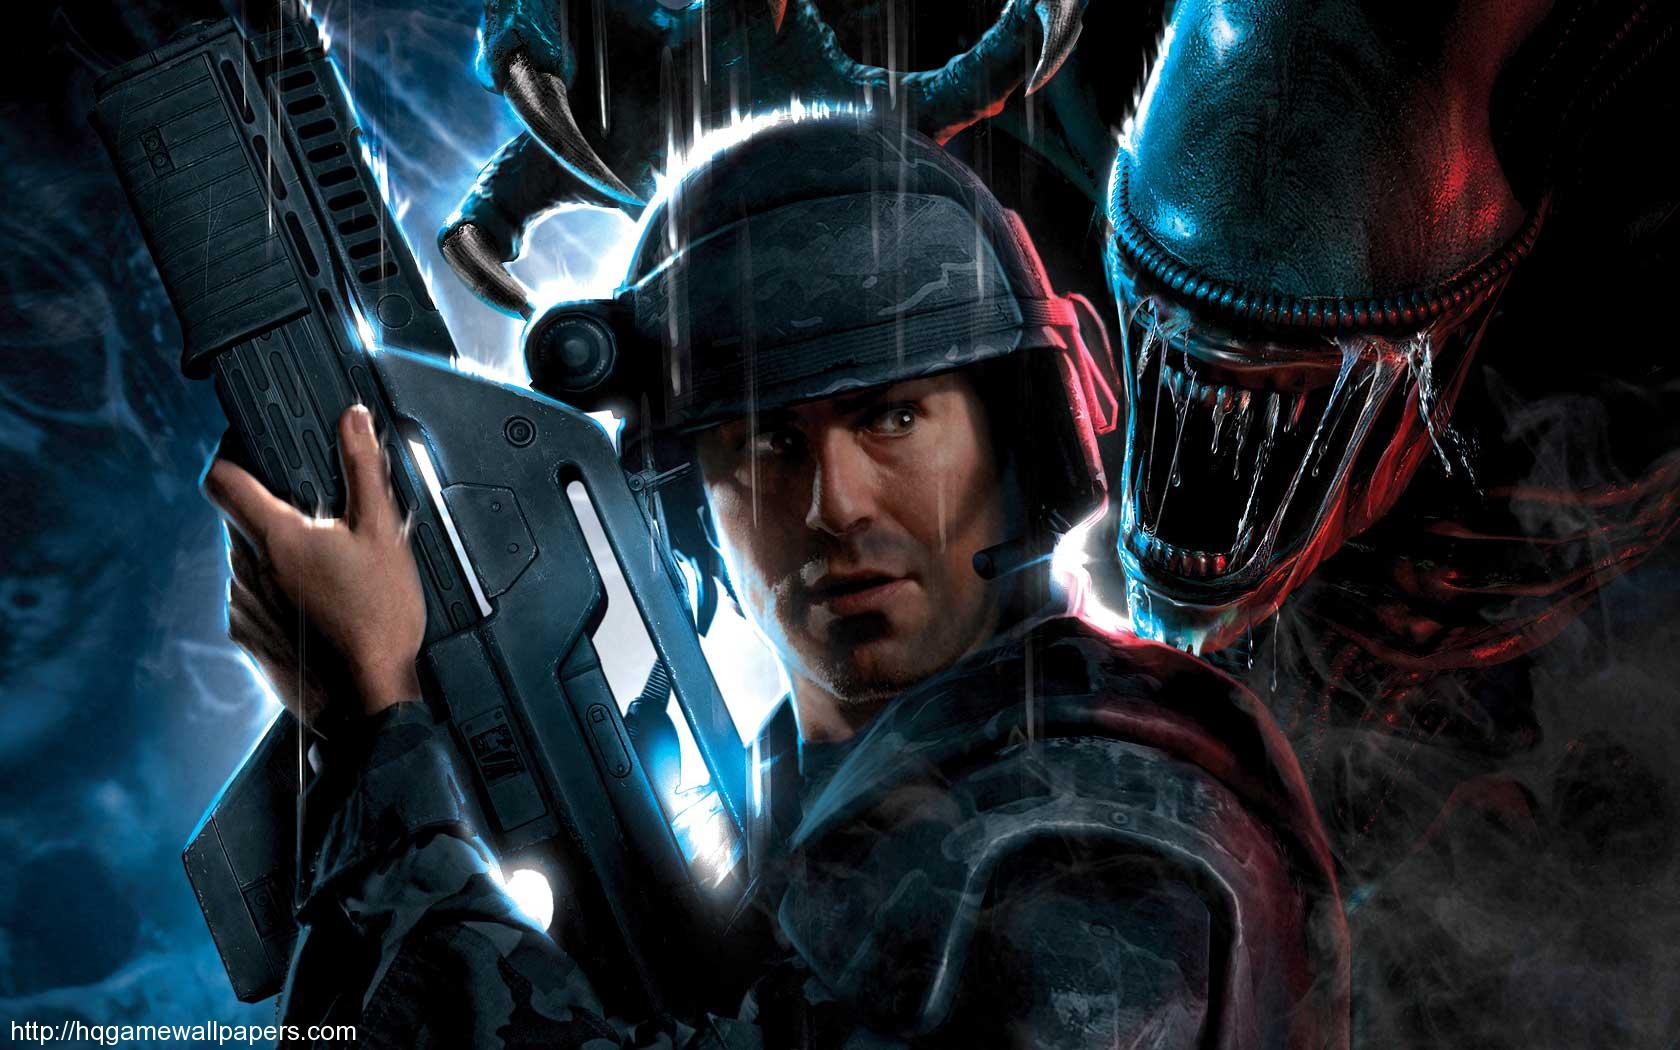 Rumor: Gearbox Aliens: Colonial Marines Cover Up